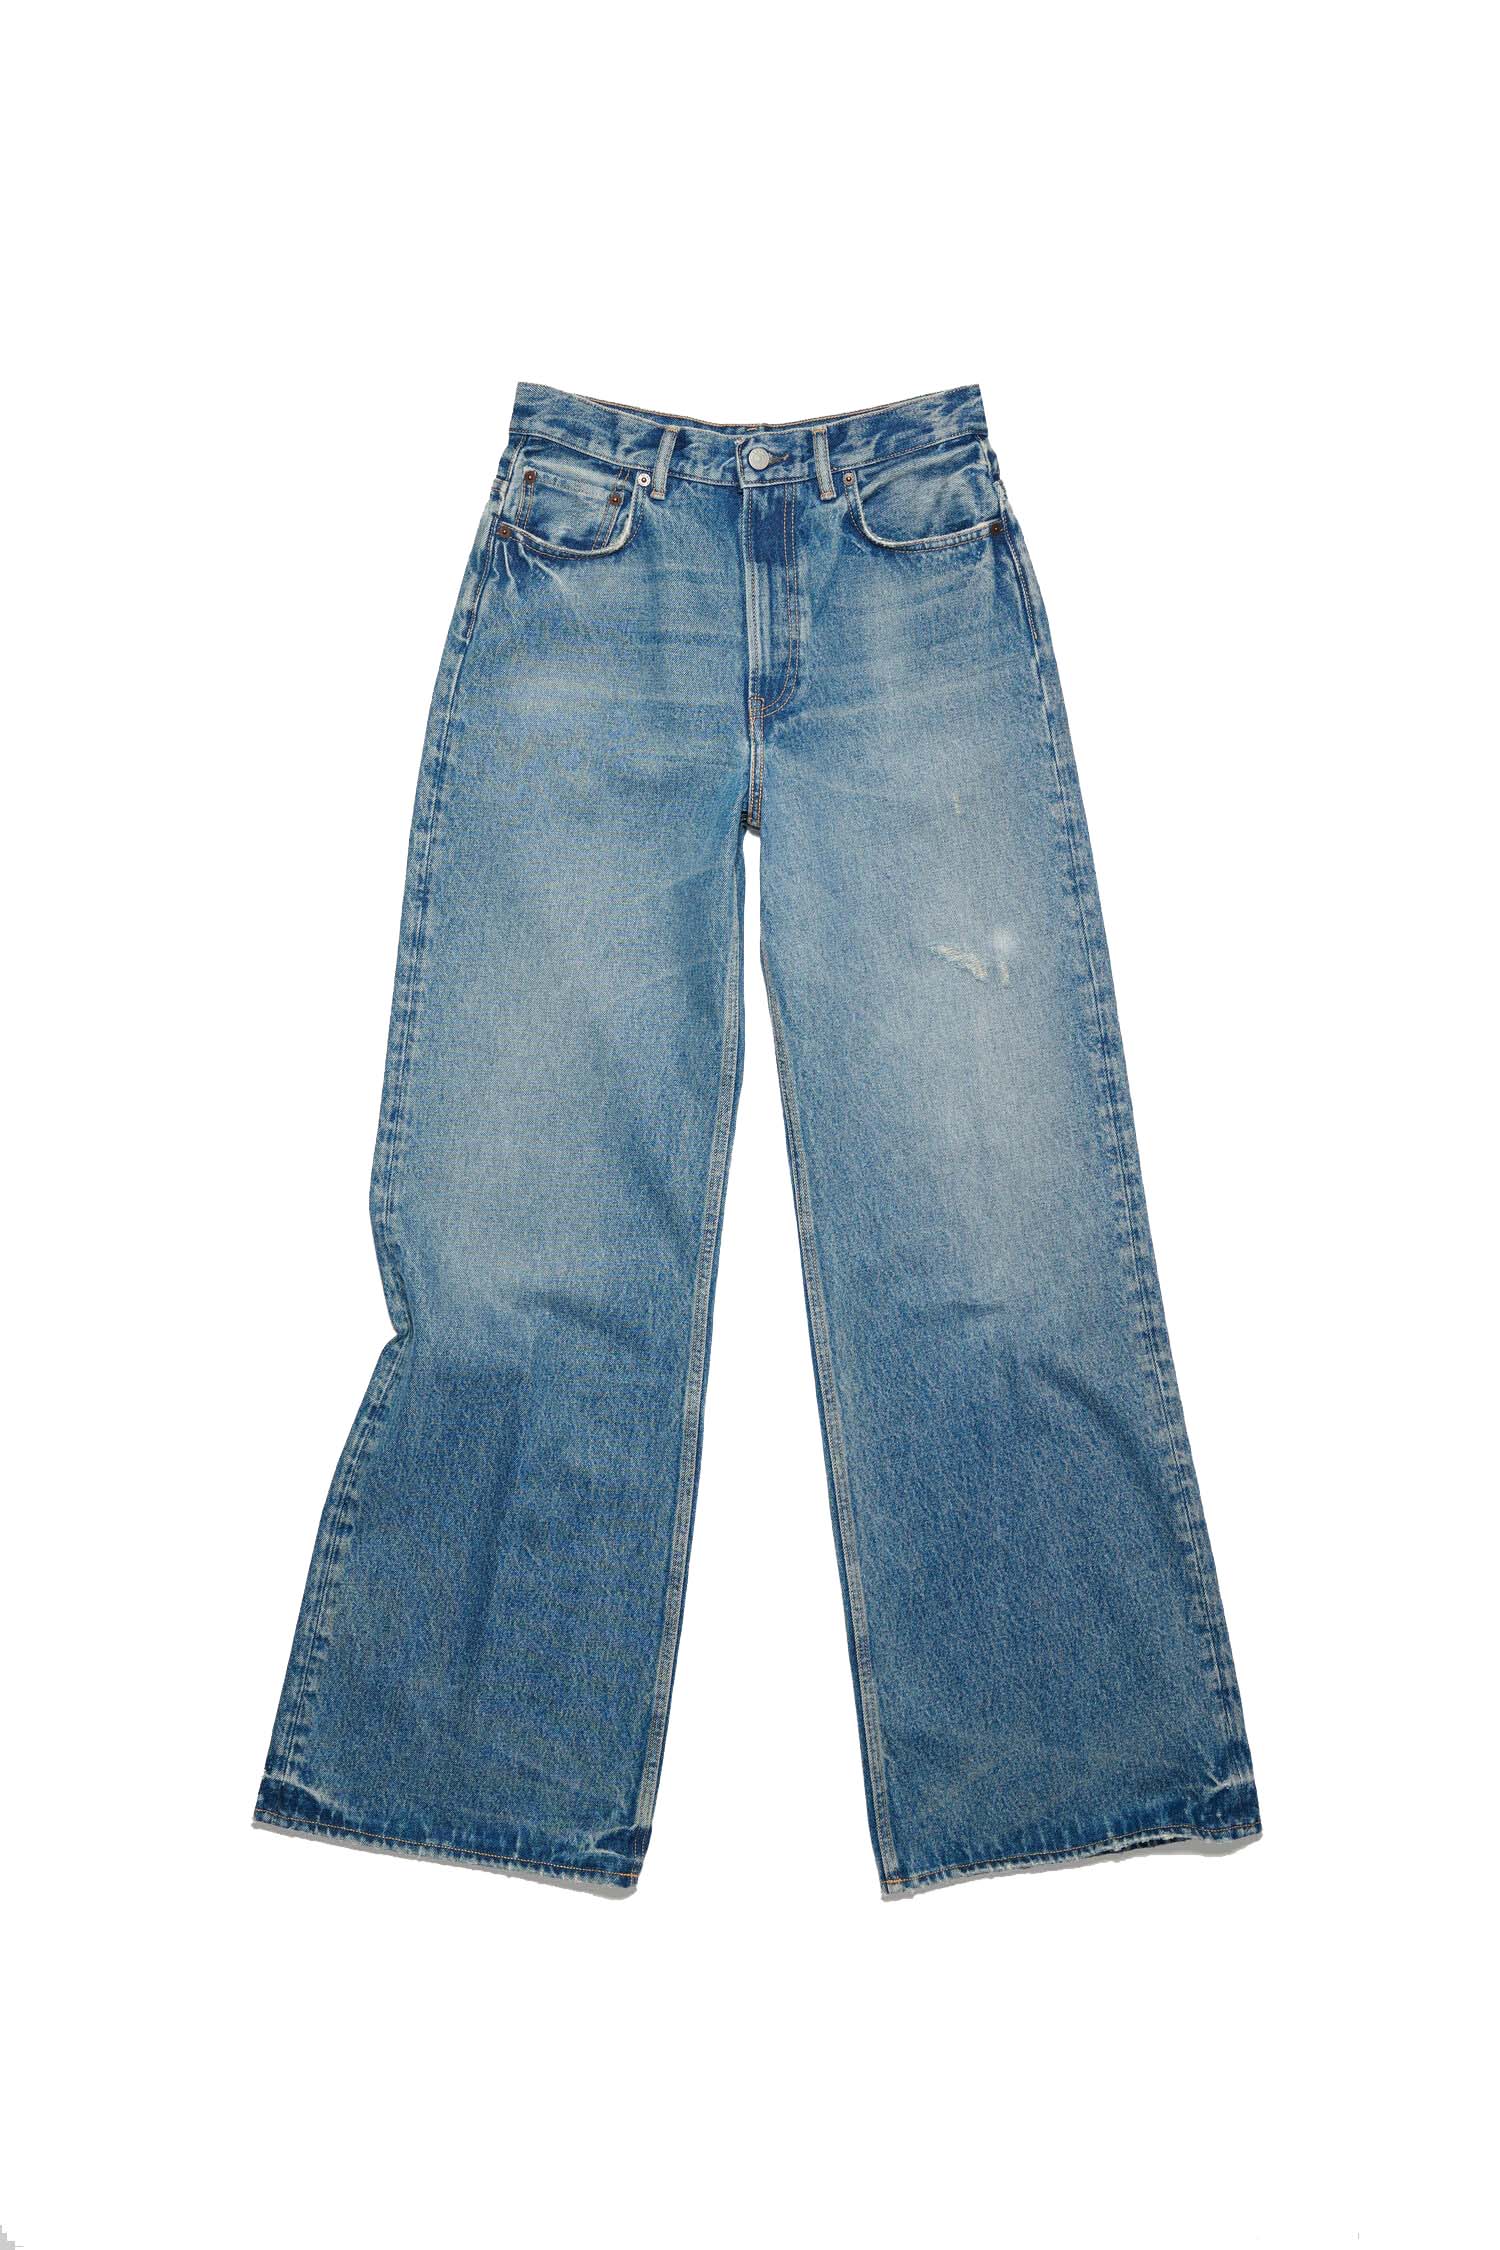 Acne Studios Relaxed Fit Jeans Blue - US